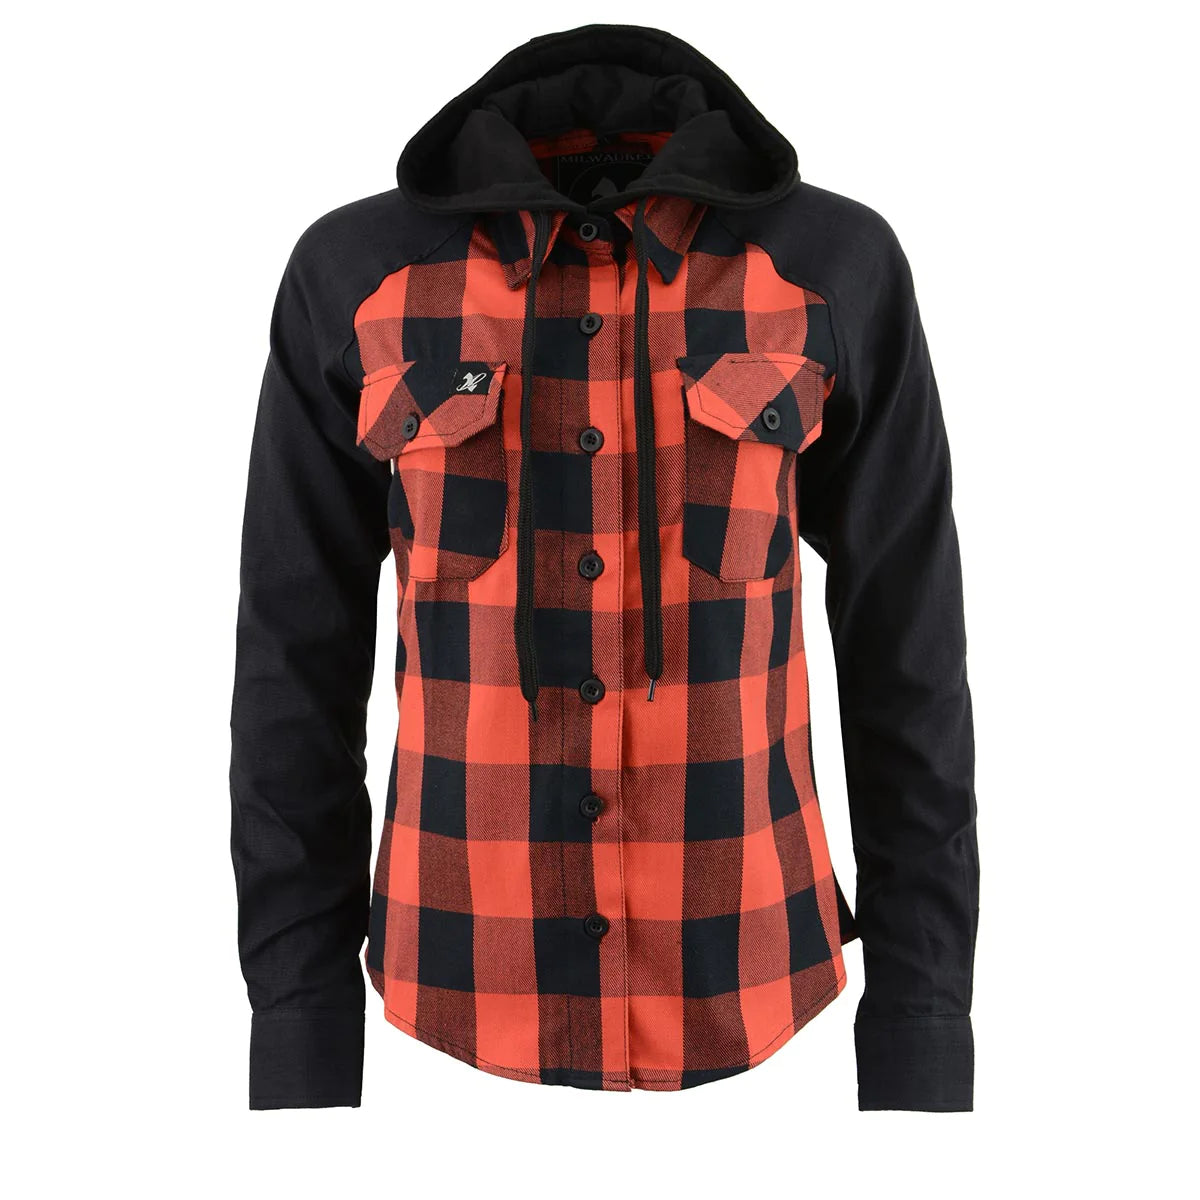 Women's Casual Black and Red Long Sleeve Cotton Flannel Shirt with Hoodie